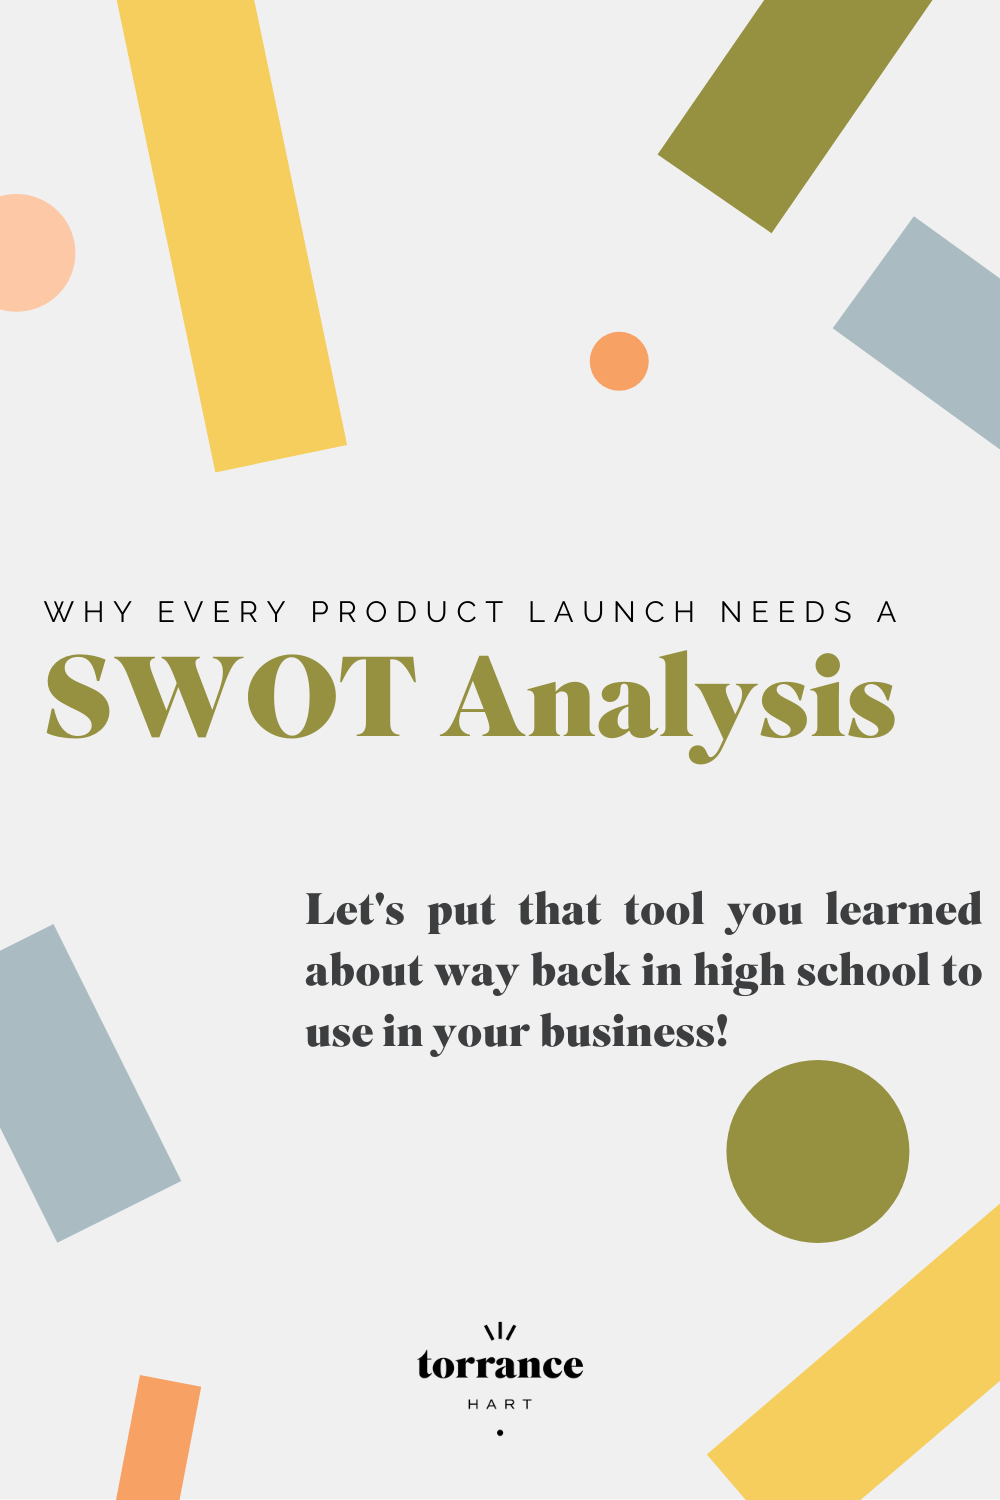 Why you need a SWOT analysis for your next product launch